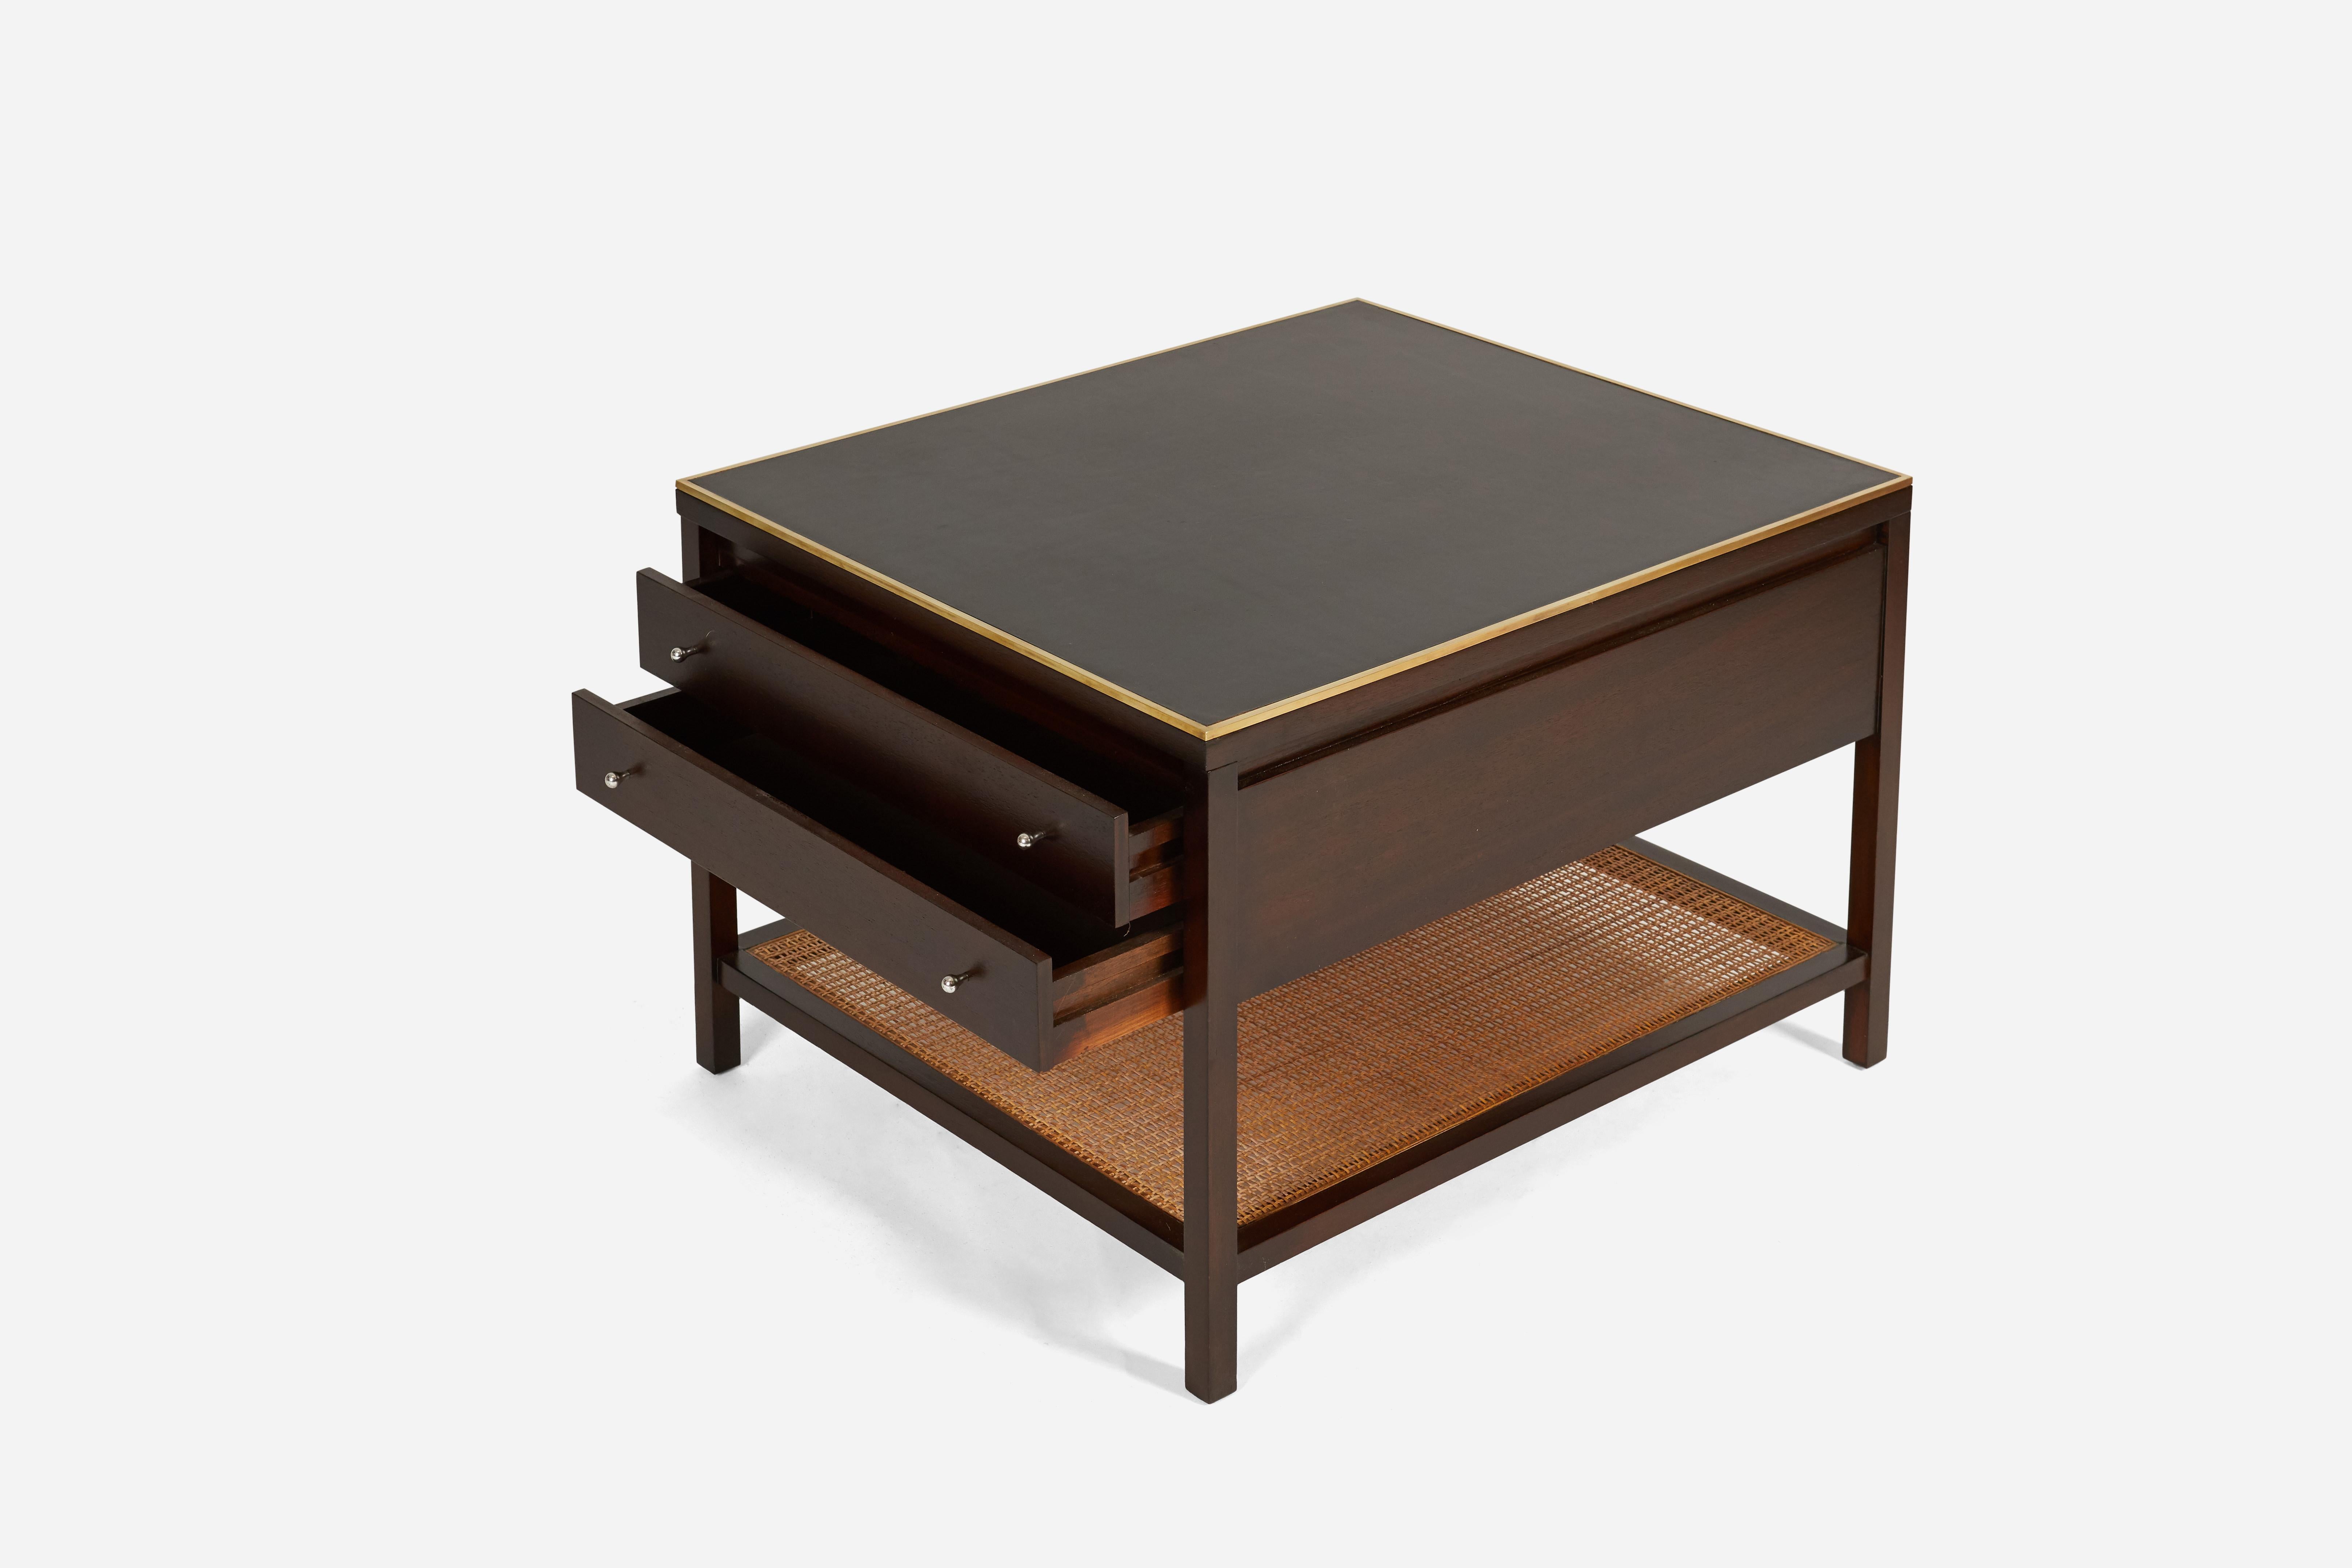 Pair of side tables designed by Paul McCobb for Calvin Furniture. Fully restored and refinished. Black leather tops with brass edging, two storage drawers, and a cane bottom shelf.  Great scale for night stands as well.